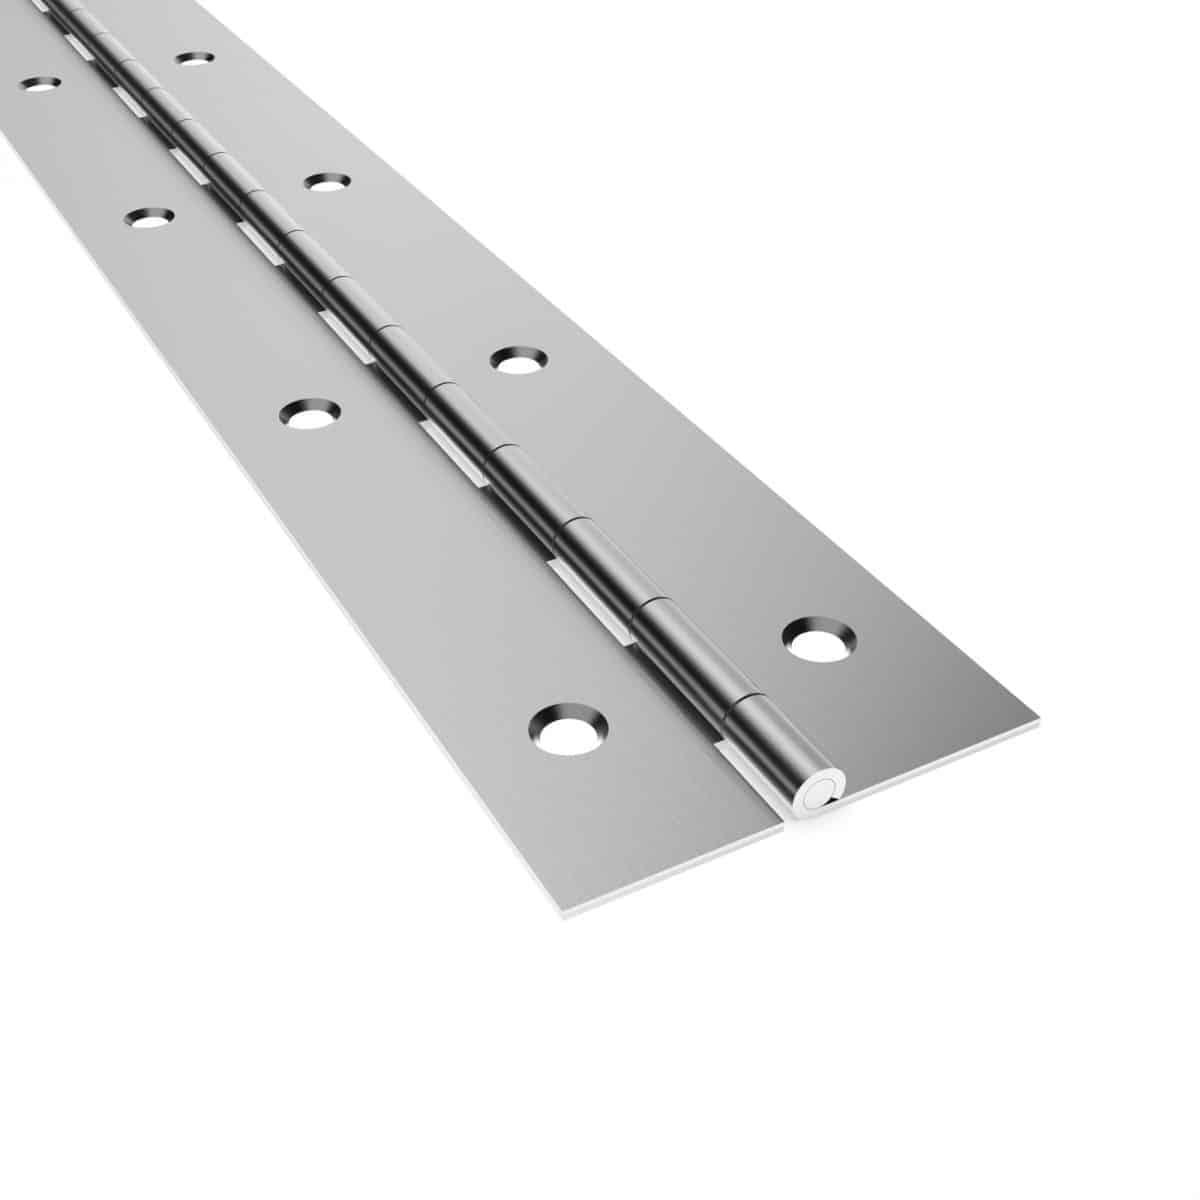 38MM 304 Stainless Steel Continuous Hinge Punched 1.8M